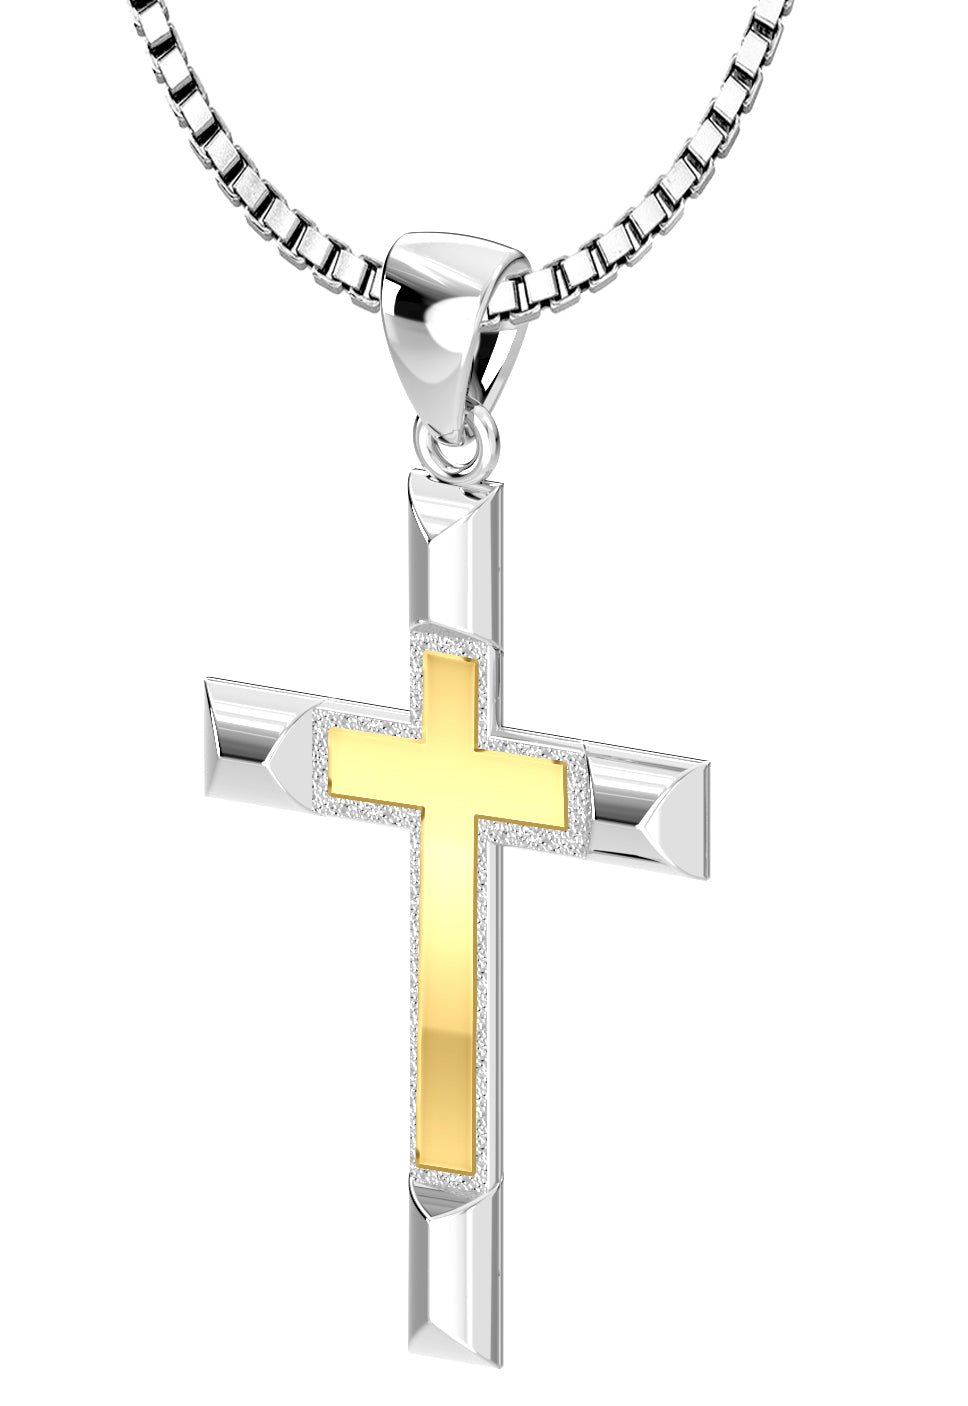 sterling silver cross necklace for women